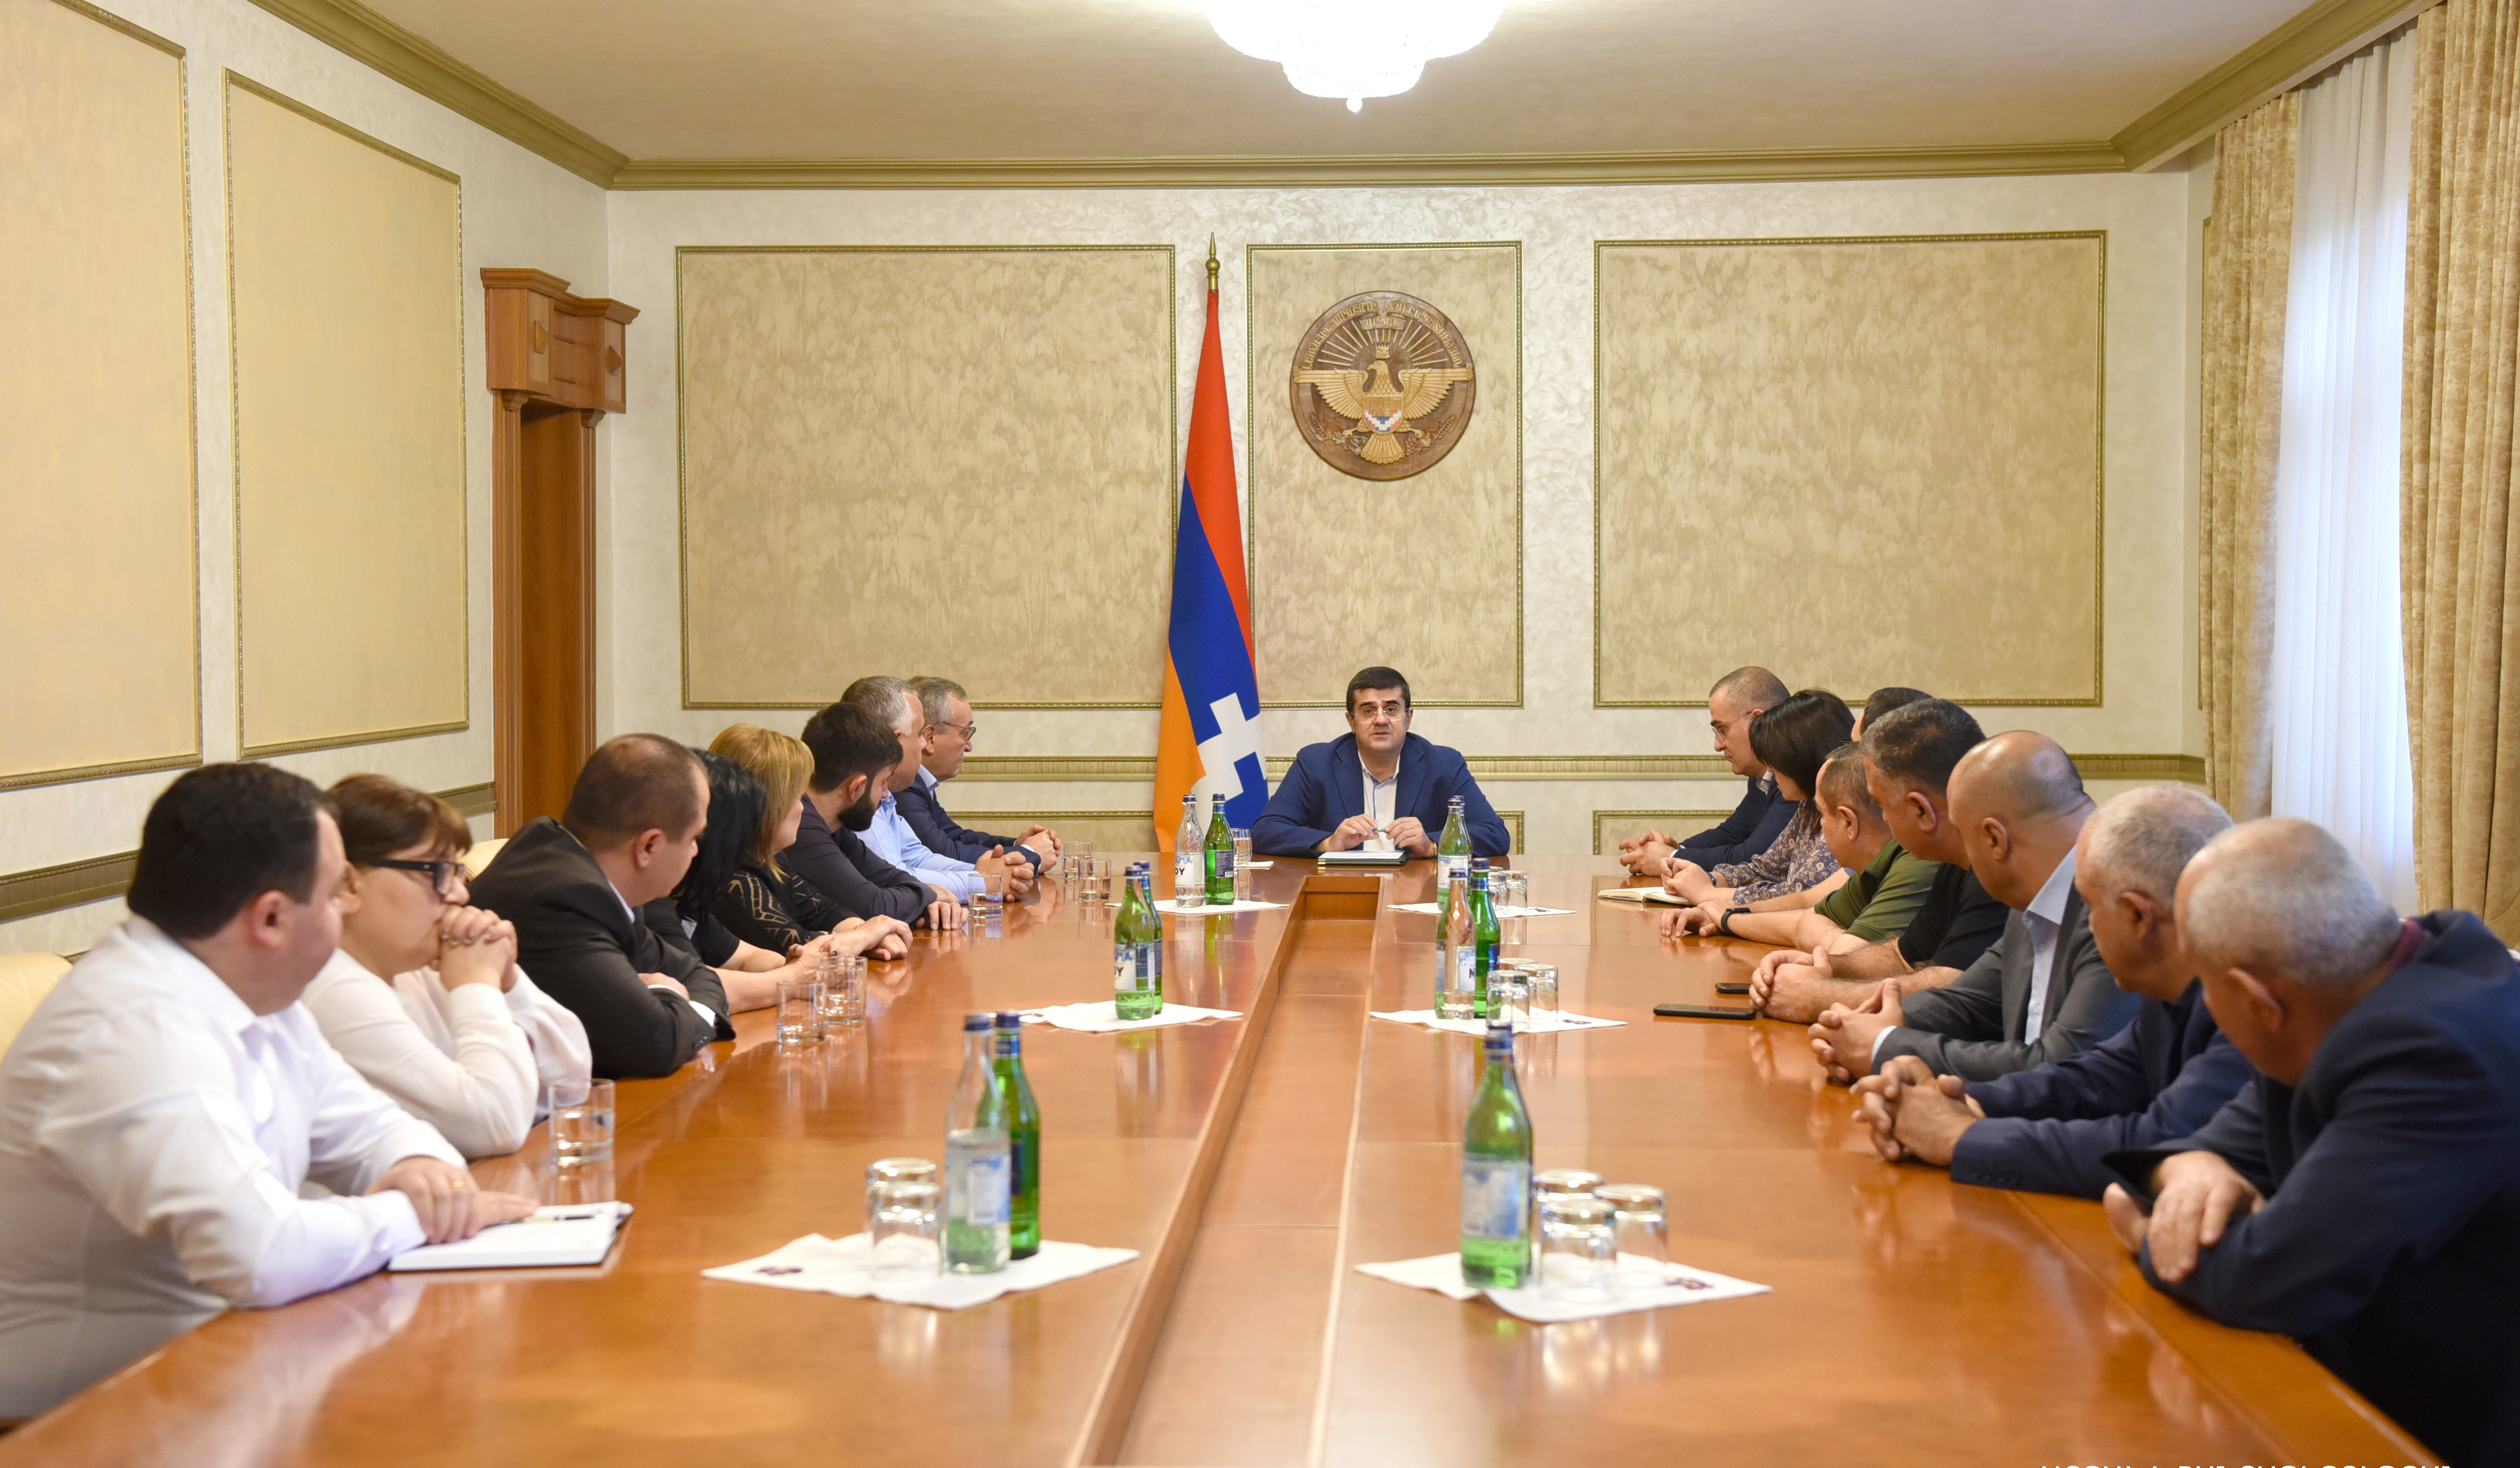 Regional developments and their impact on Artsakh discussed at meeting chaired by Arayik Harutyunyan